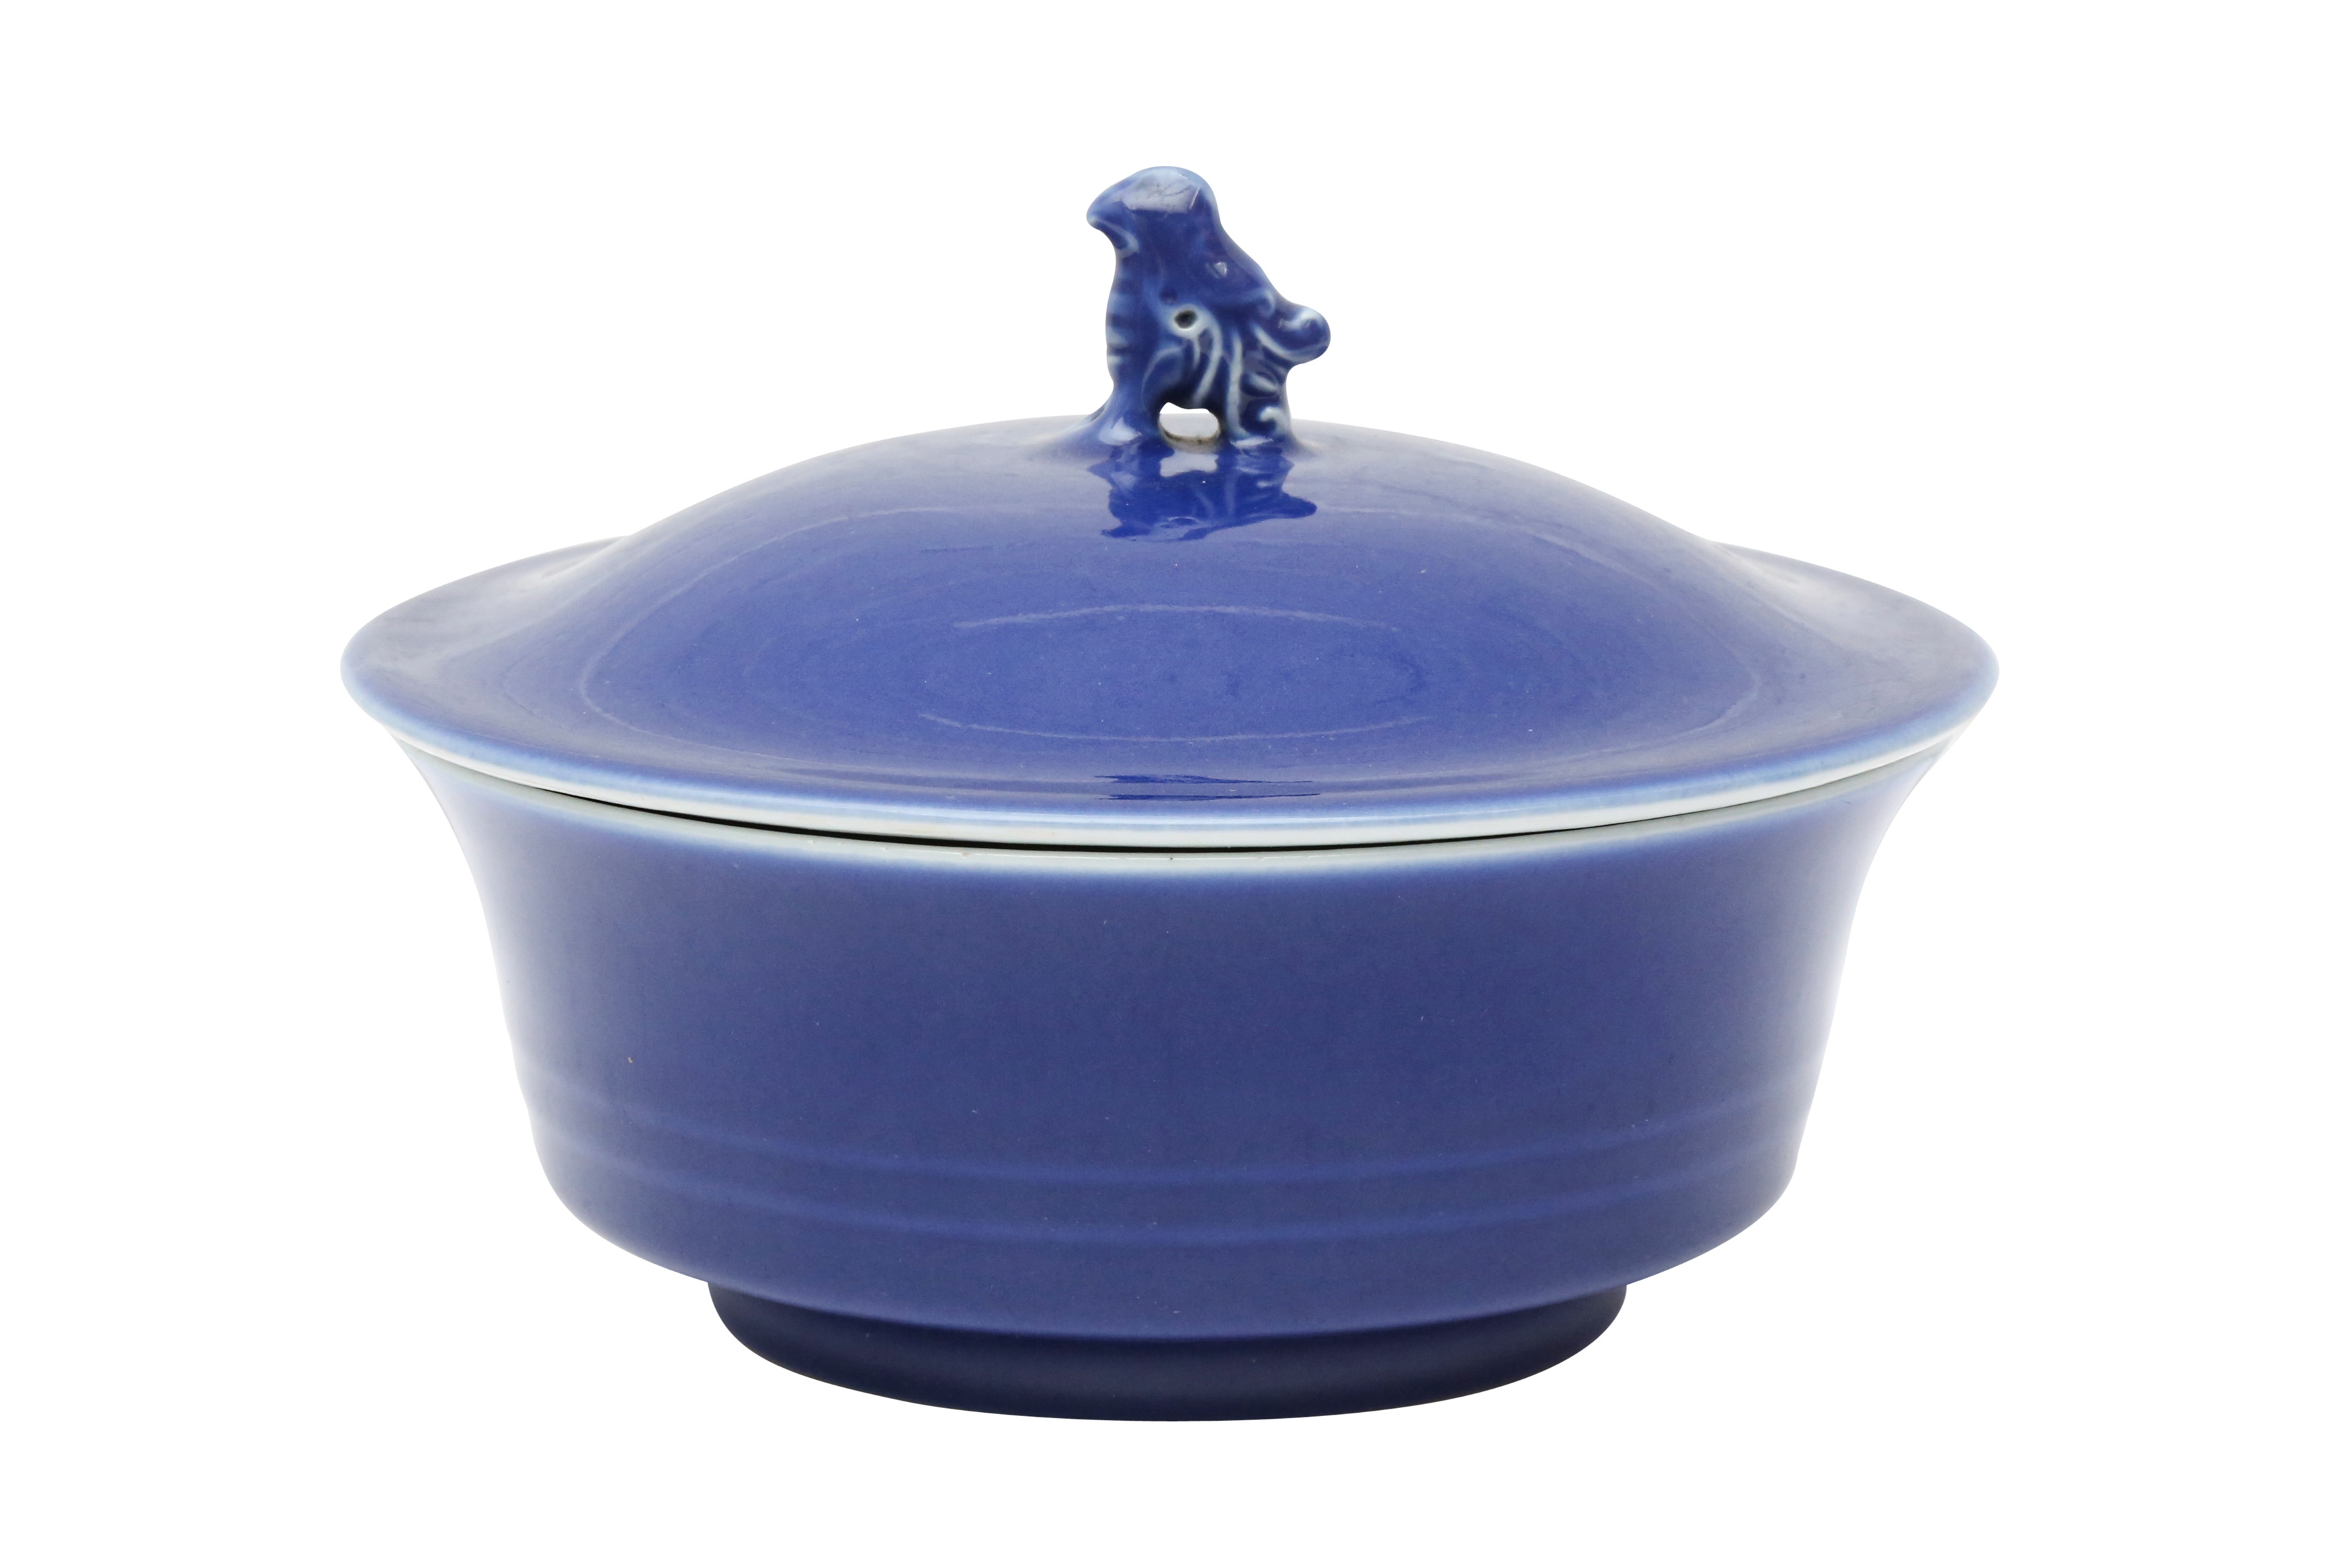 A CHINESE MONOCHROME BLUE-GLAZED BOWL AND COVER 藍釉朱雀鈕蓋盌